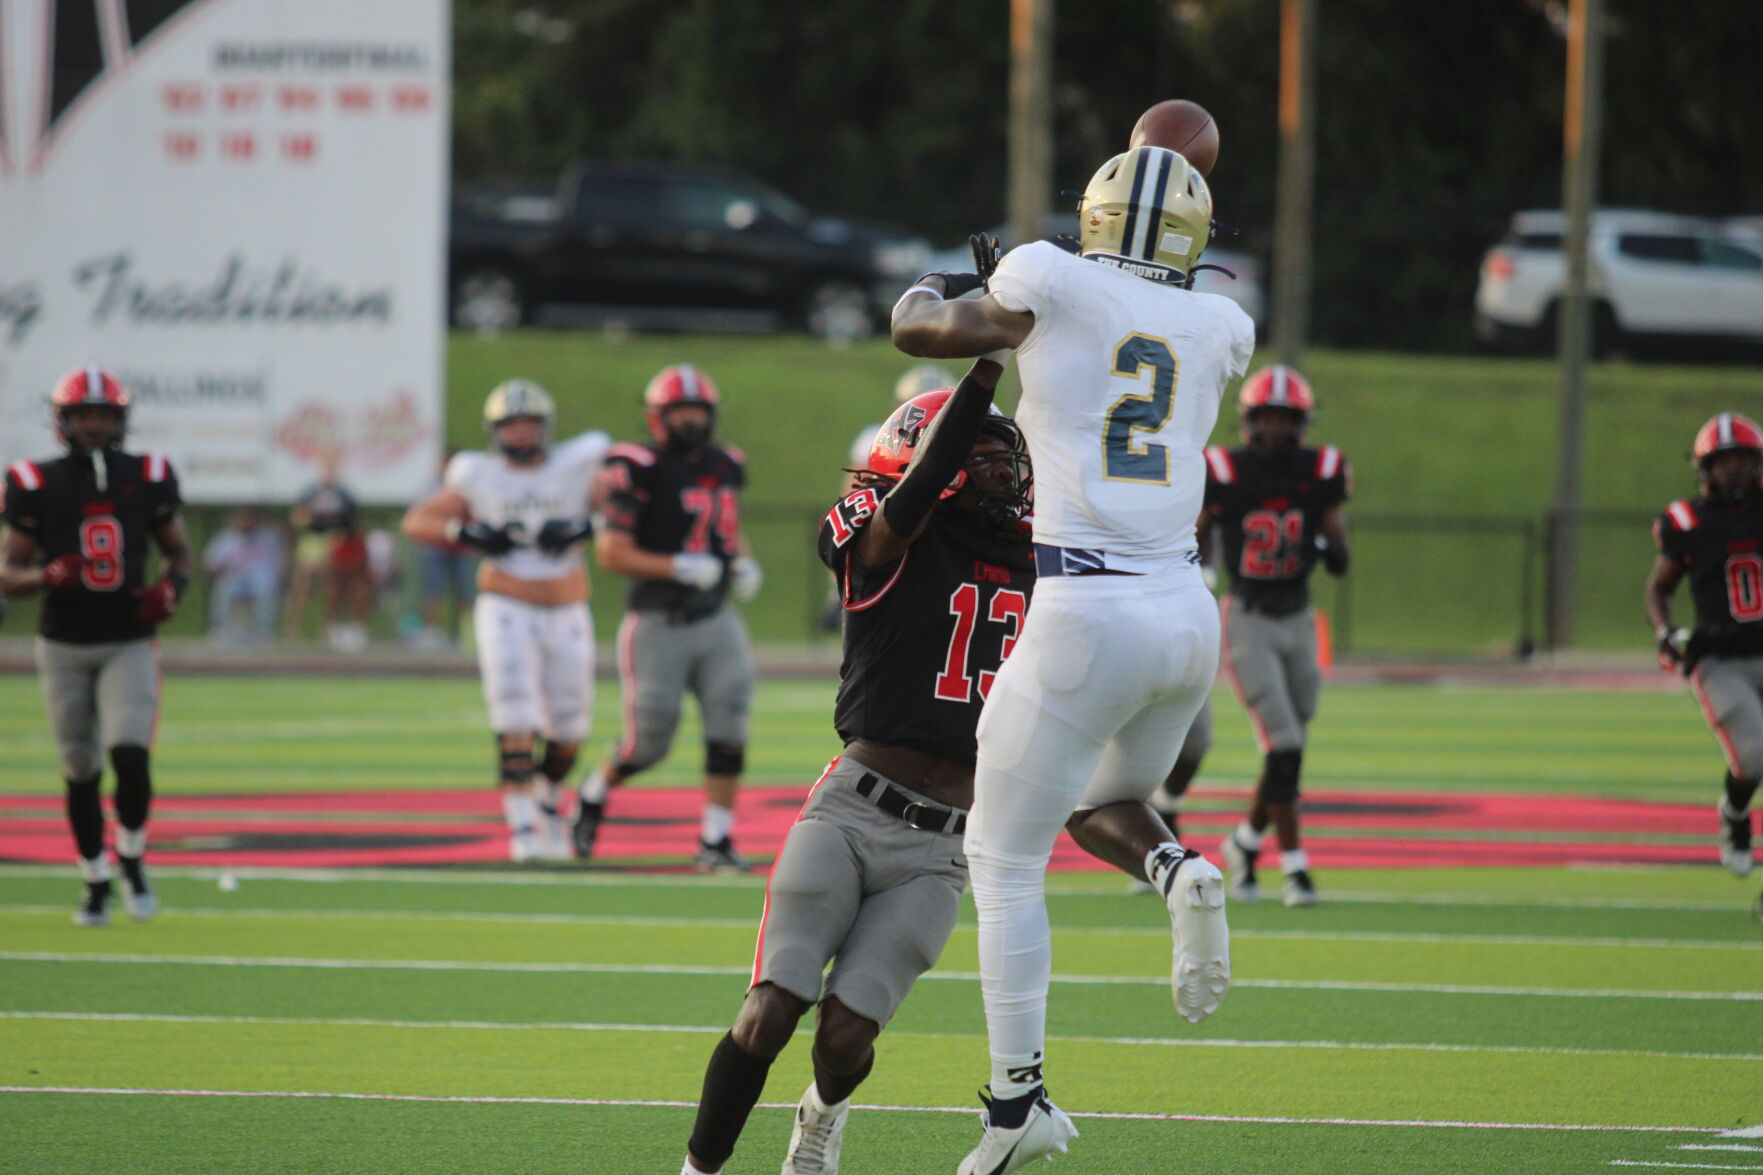 Thomas County Central Yellow Jackets shut out Cairo Syrupmakers 38-0 in season opener